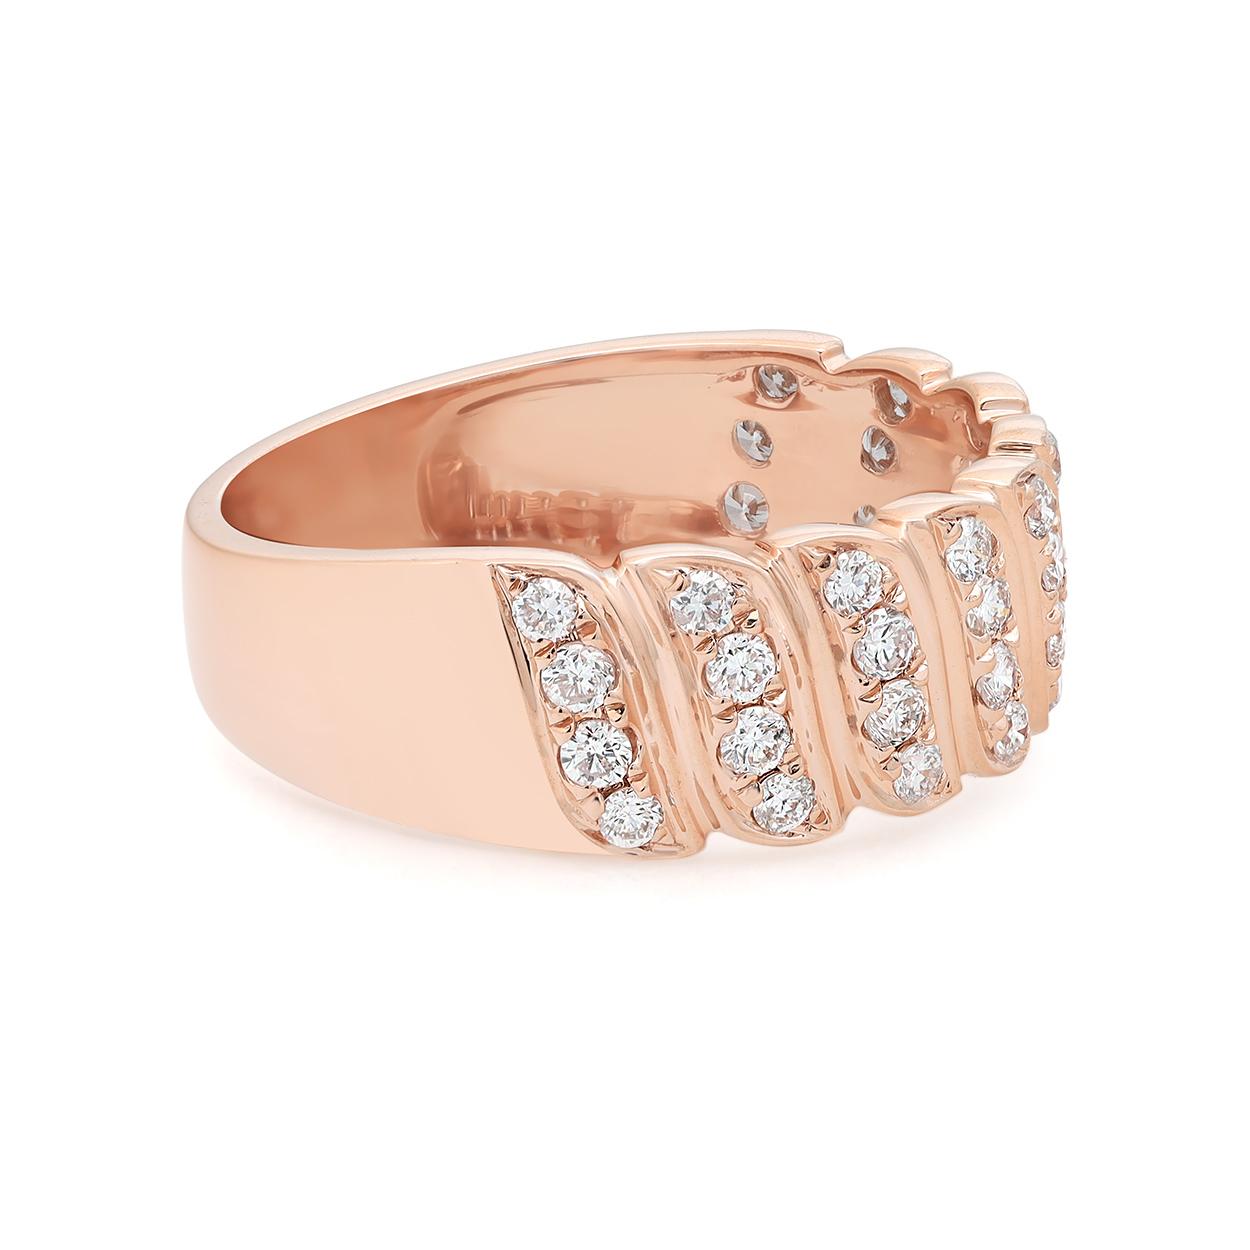 This timeless and stylish diamond band ring is crafted in 18k rose gold and features 36 pave set dazzling round brilliant cut diamonds weighing 0.52 carat. Diamond quality: G-H and clarity VS-SI. A spectacular symbol of love, perfect for a gift or